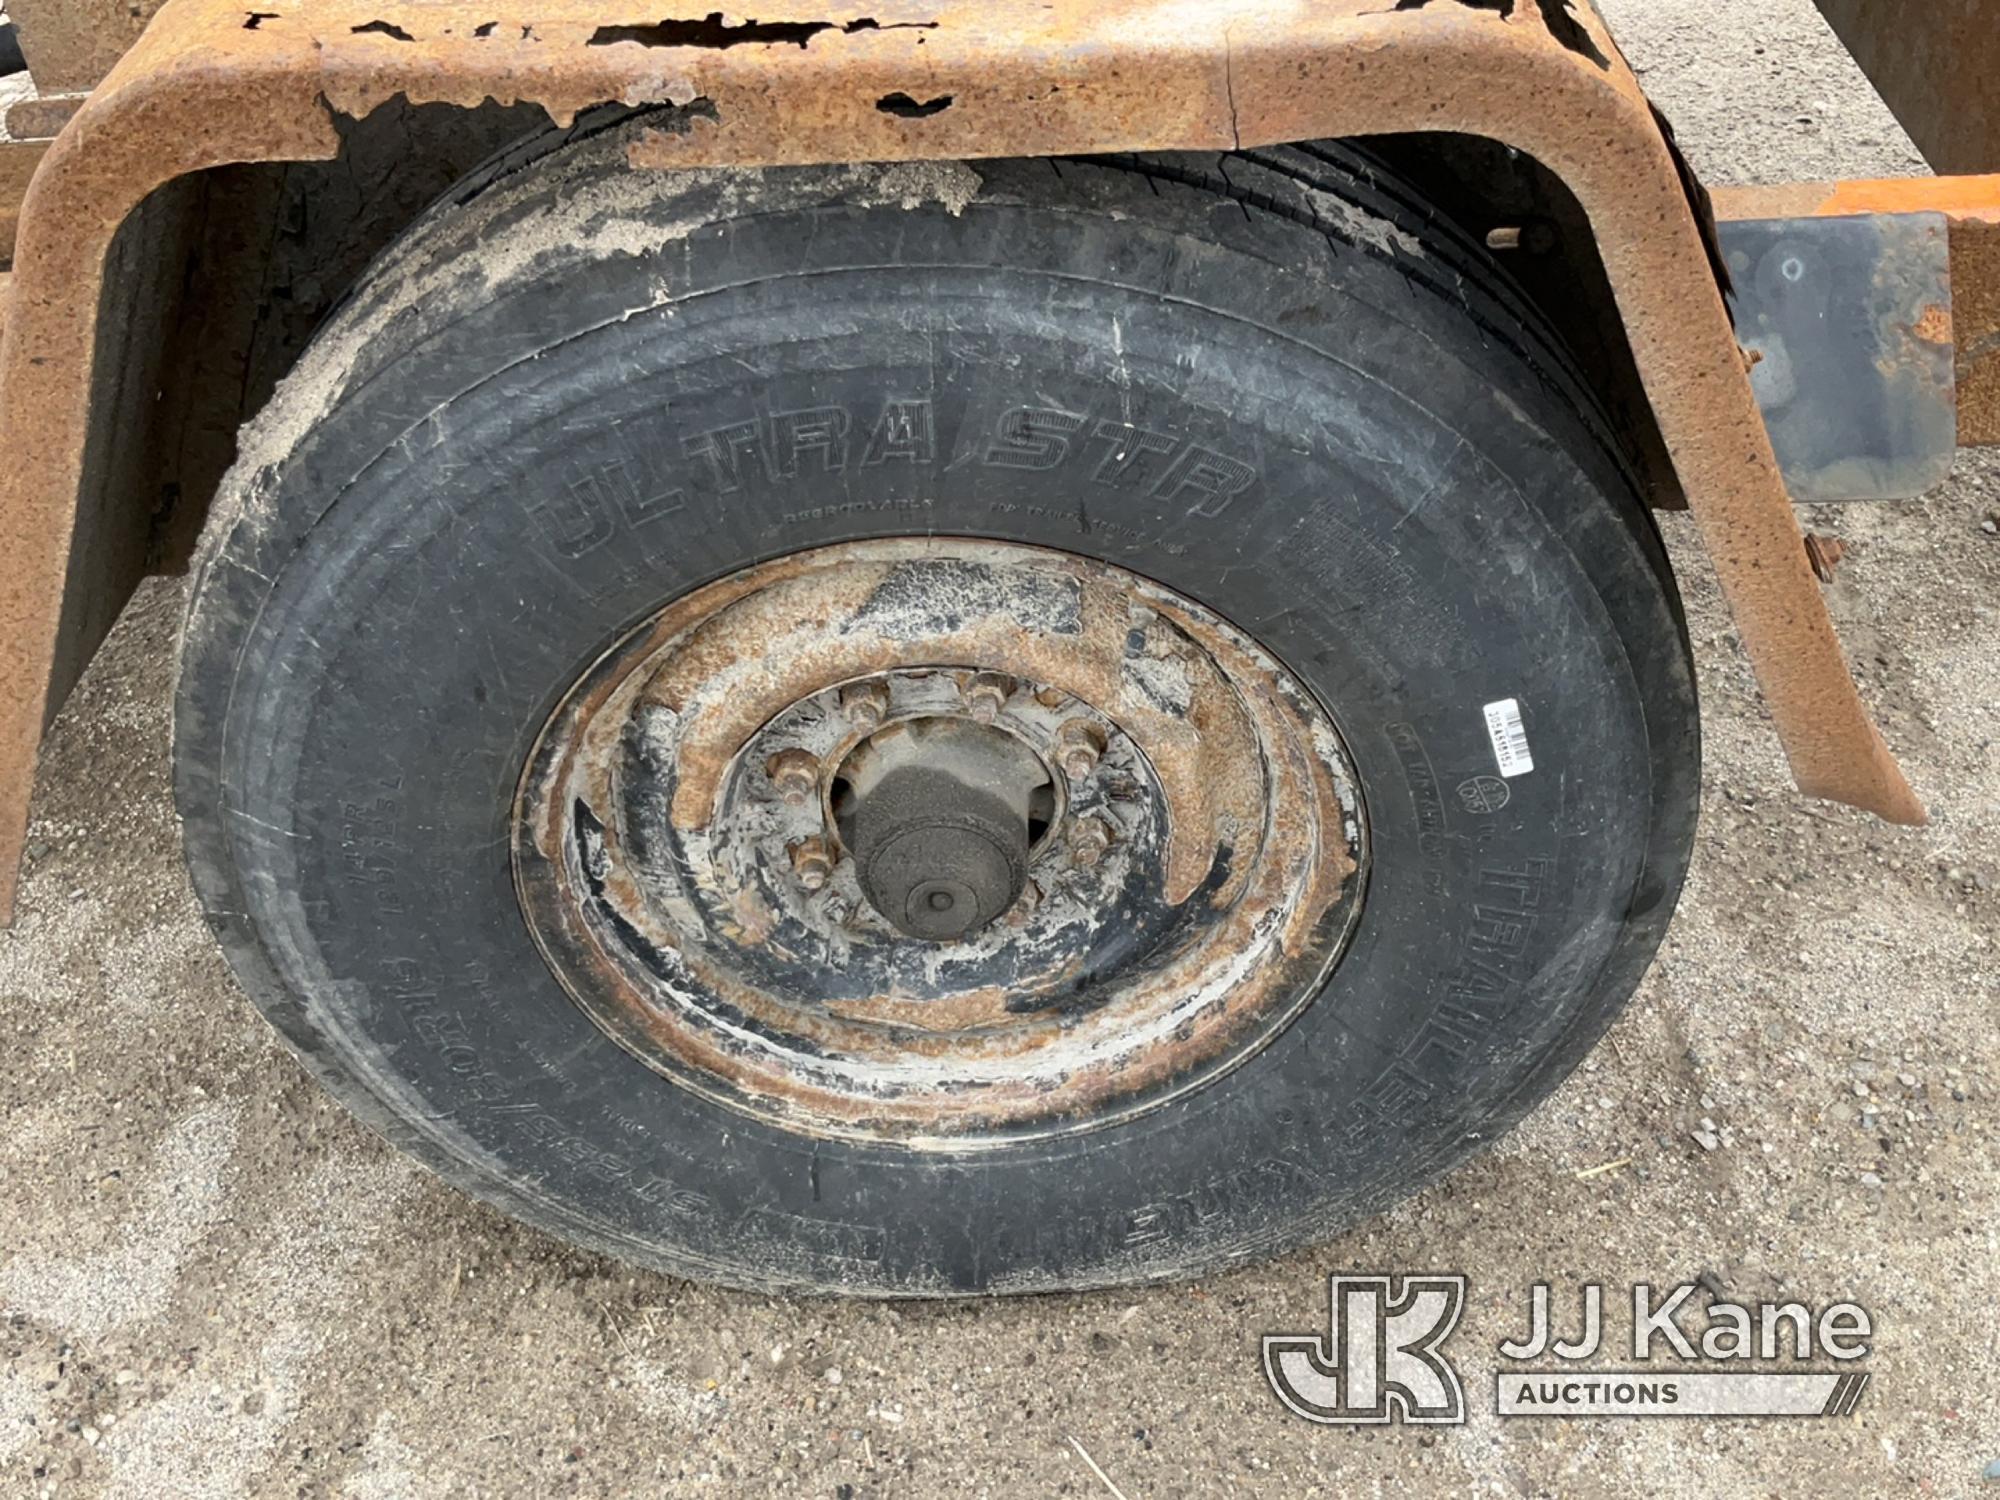 (Charlotte, MI) 2015 Altec DRM12 Chipper (12in Drum) Not Running, Cranks with Jump. Seller States: N